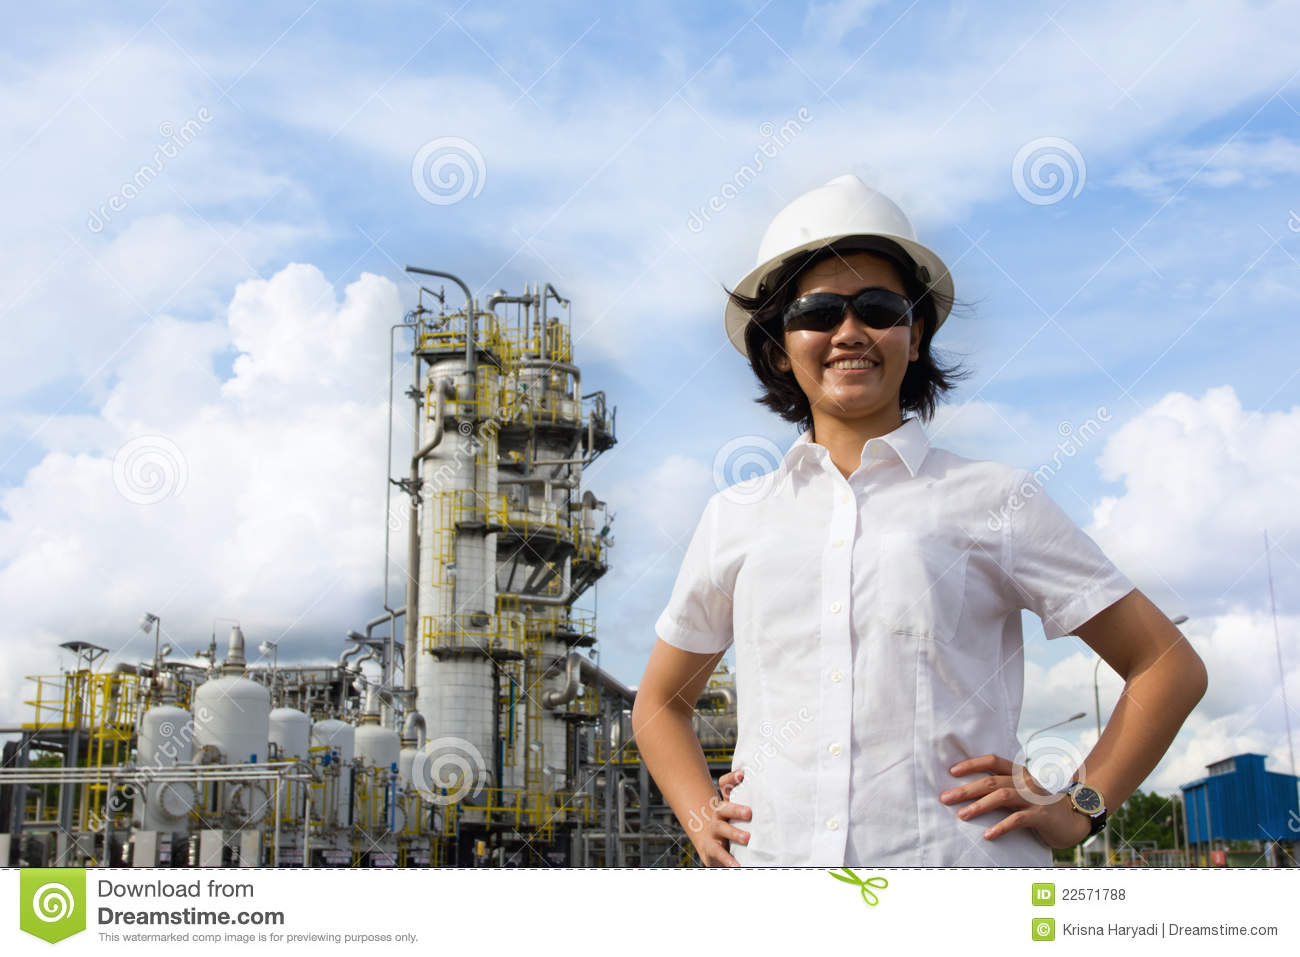 Smiling Young Female Engineer  Royalty Free Stock Photos   Image    